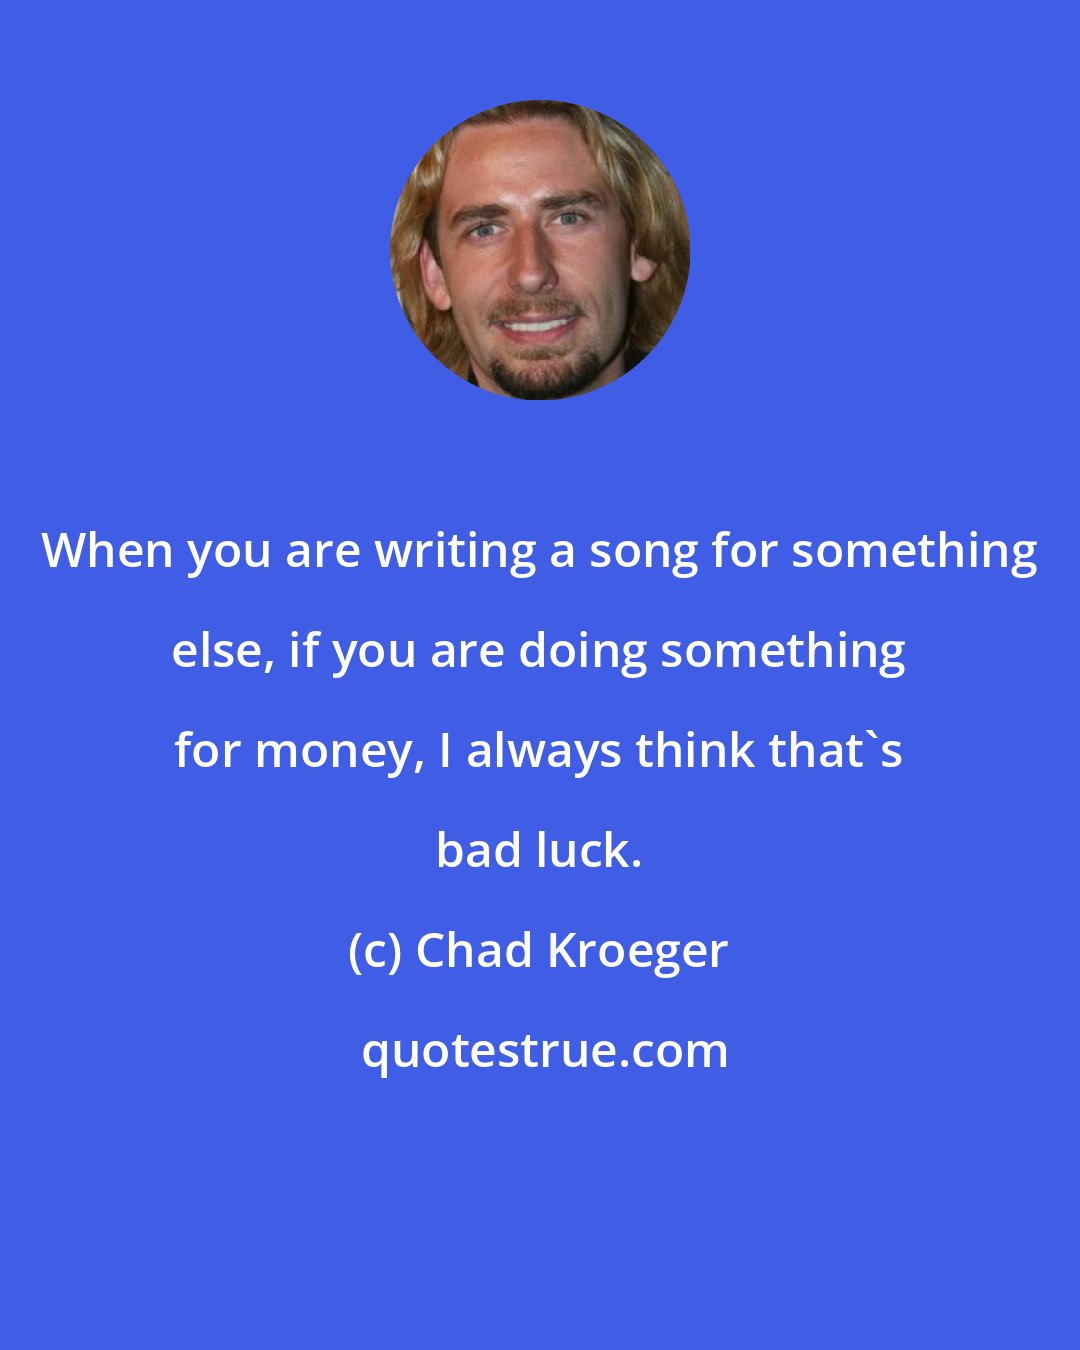 Chad Kroeger: When you are writing a song for something else, if you are doing something for money, I always think that's bad luck.